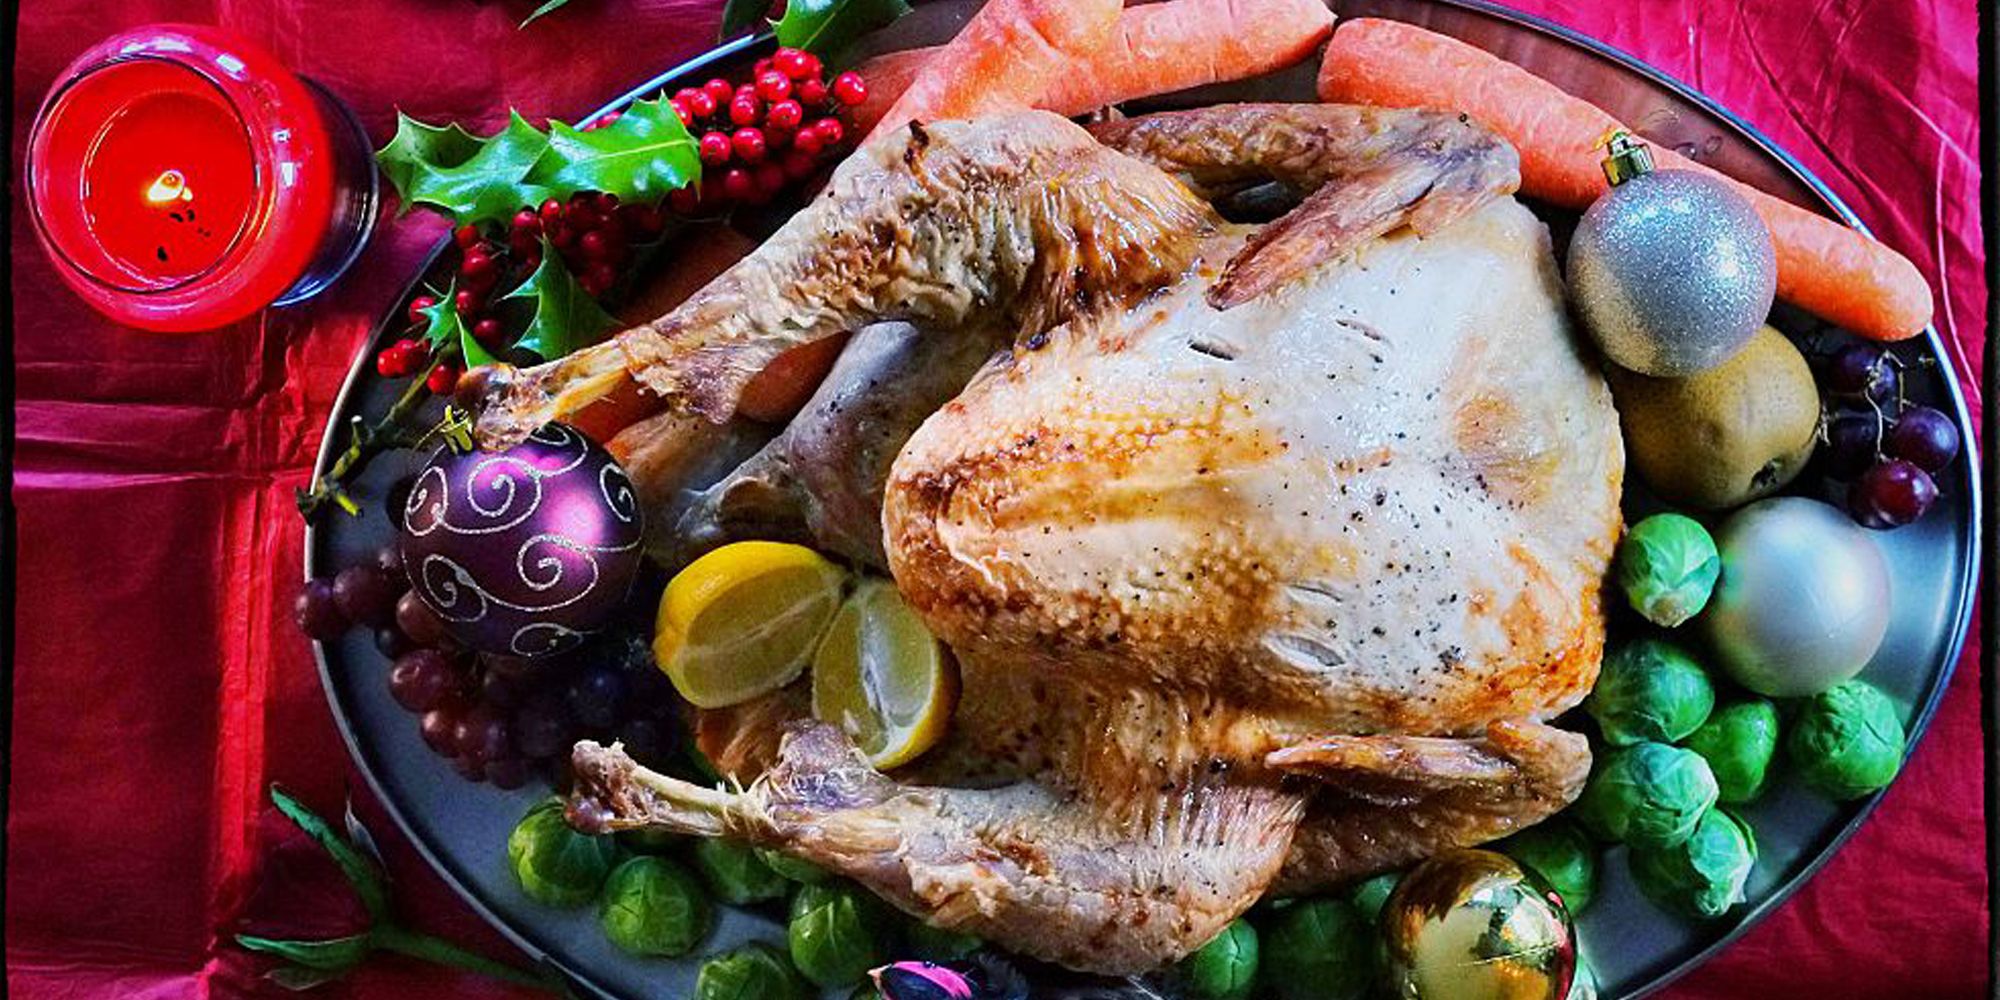 Top 15 English Christmas Foods How To Serve A British Holiday Dinner